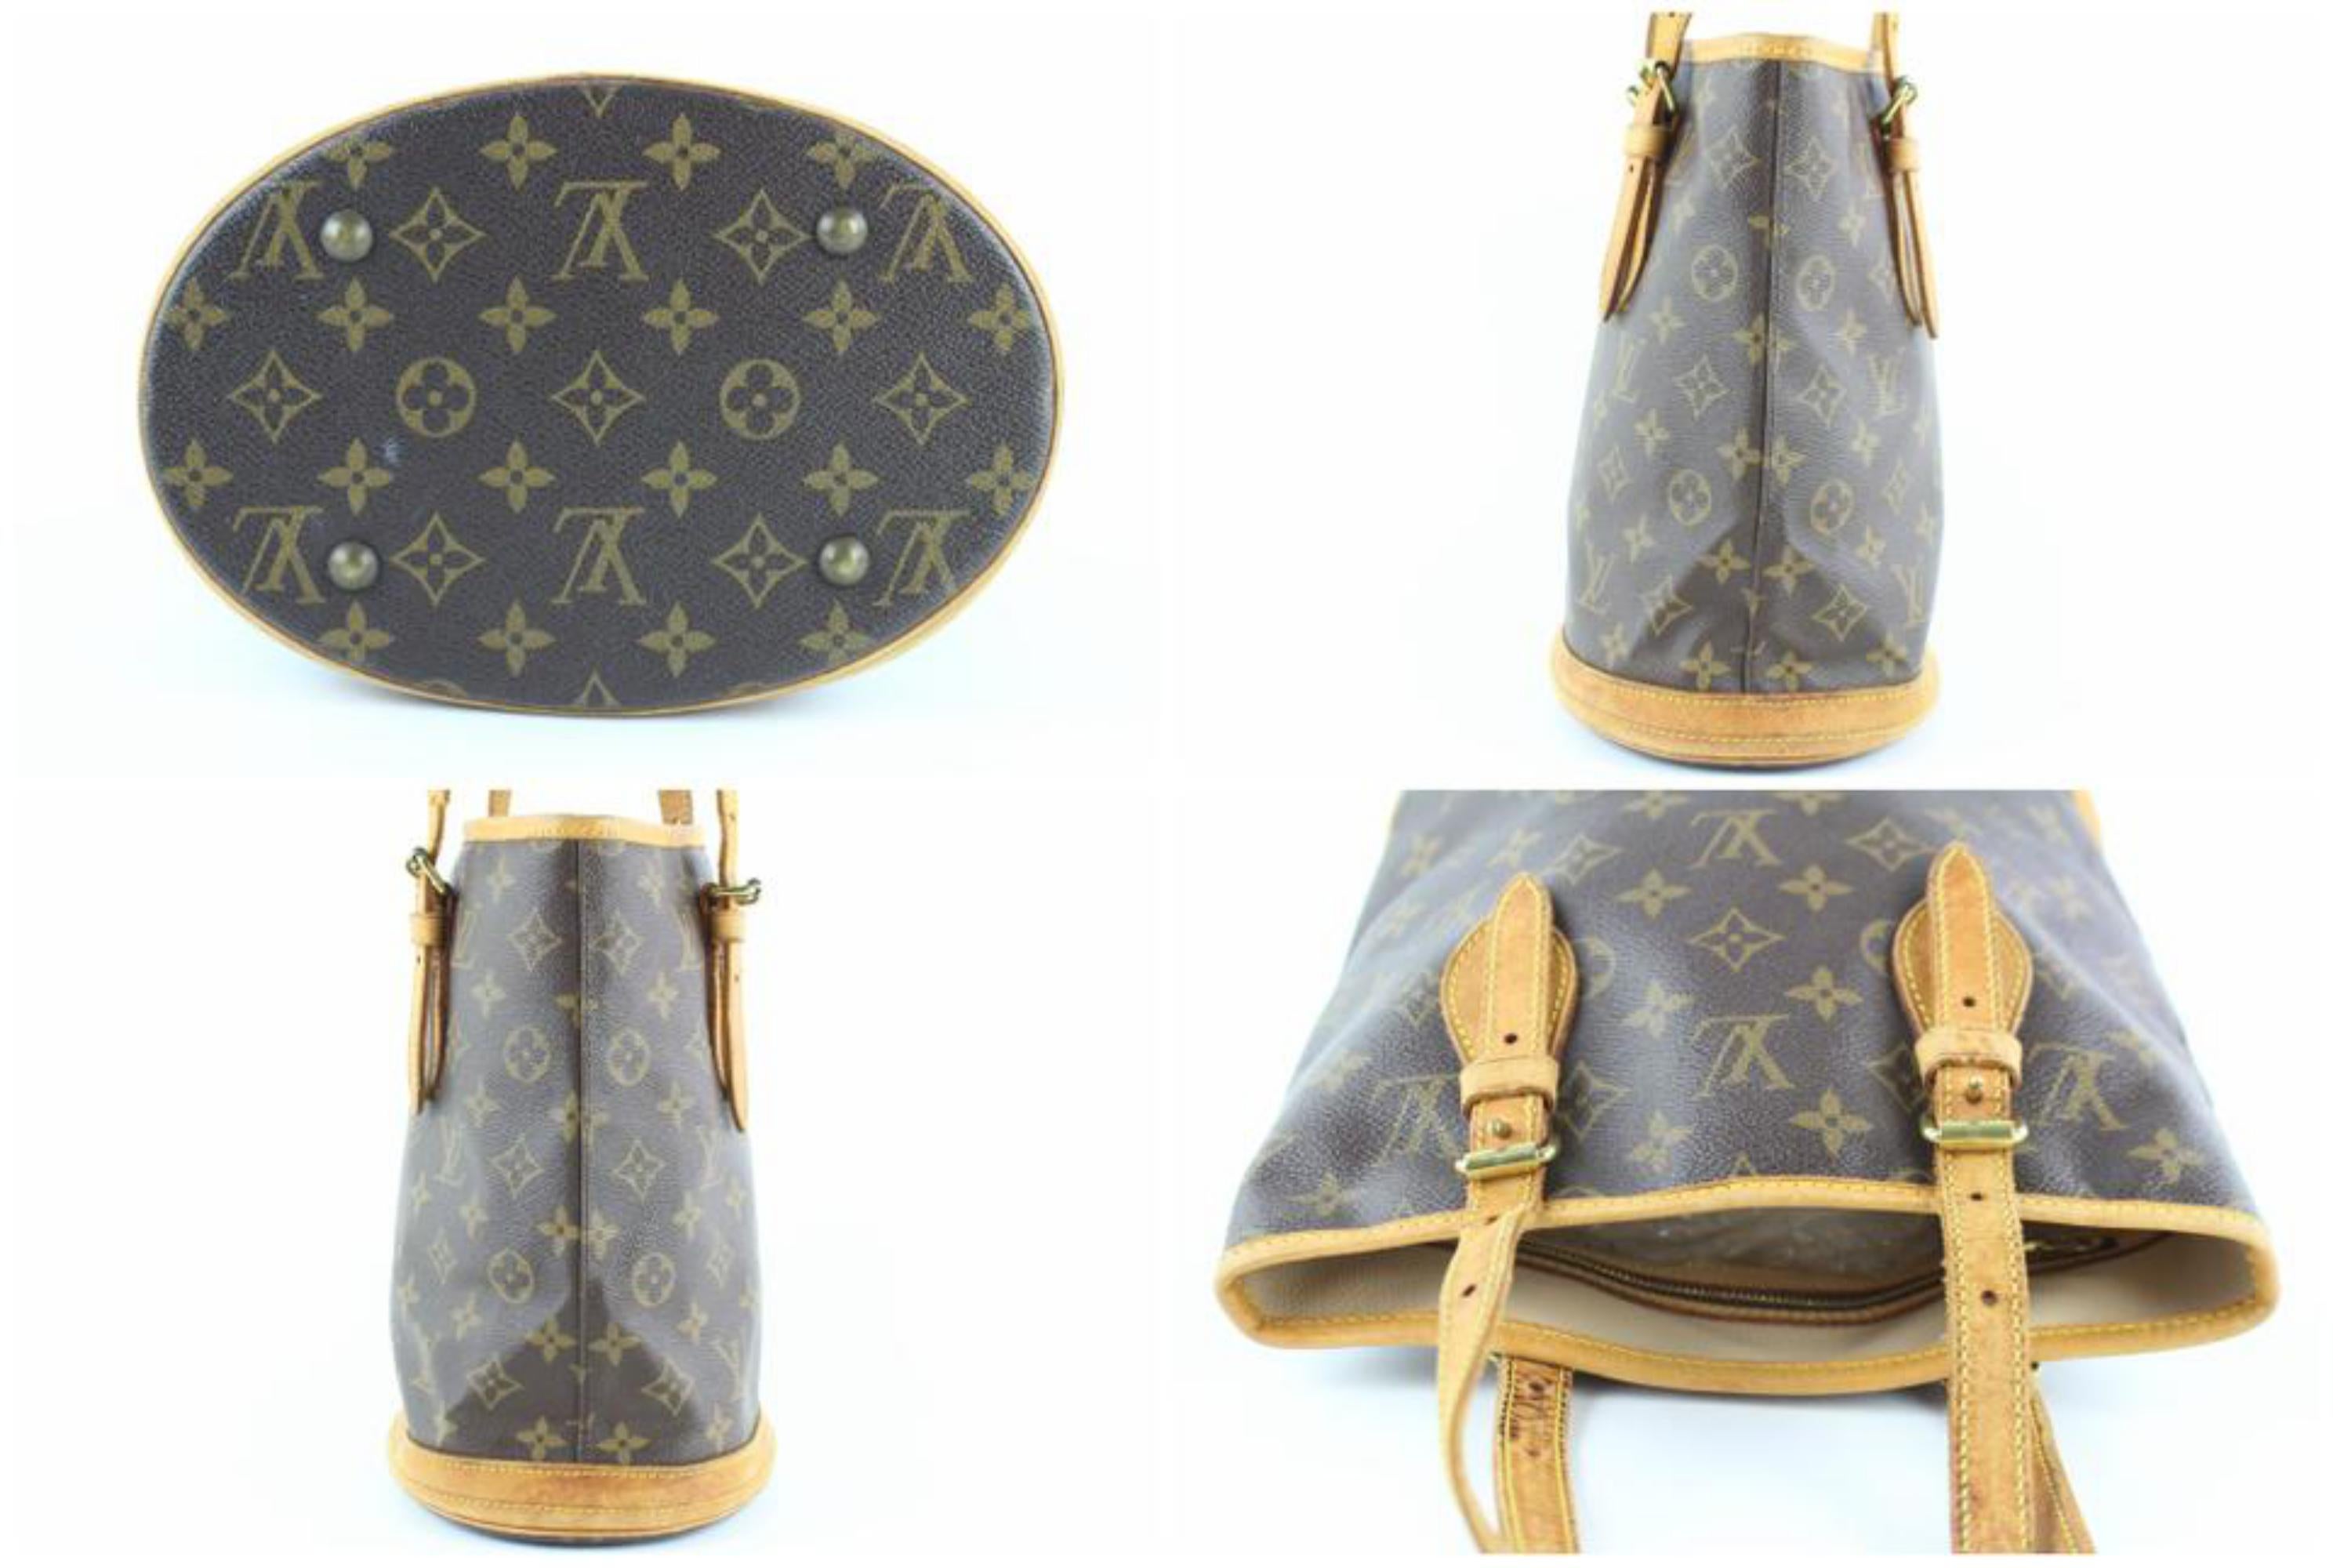 Louis Vuitton Bucket Petite Pm 231190 Brown Coated Canvas Shoulder Bag In Good Condition For Sale In Forest Hills, NY